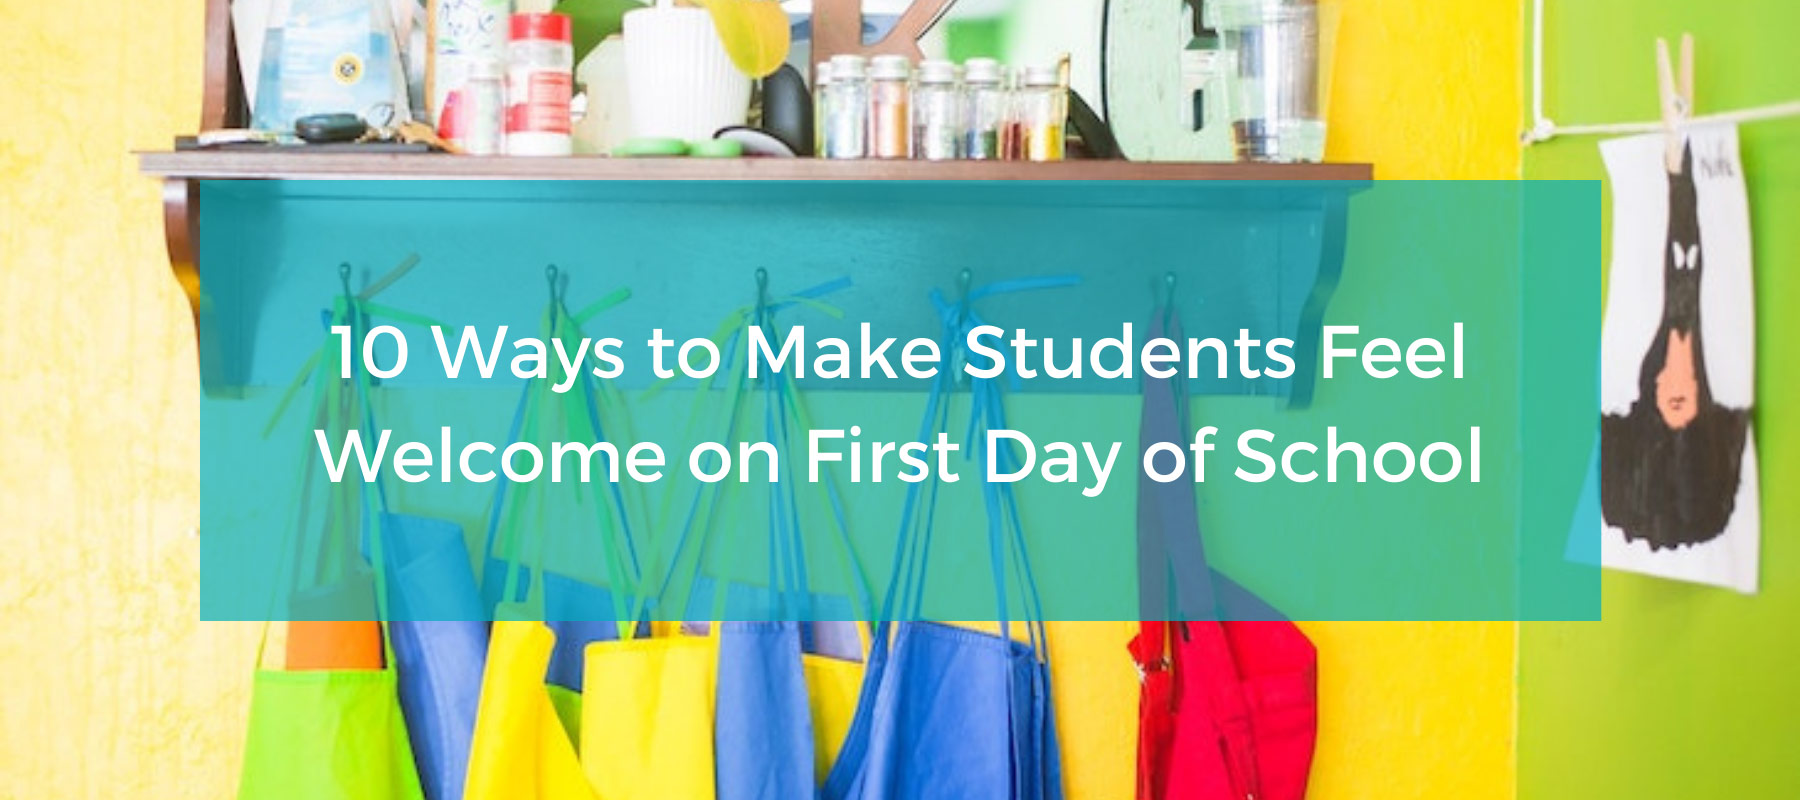 10 Ways to Make Students Feel Welcome on the First Day of School